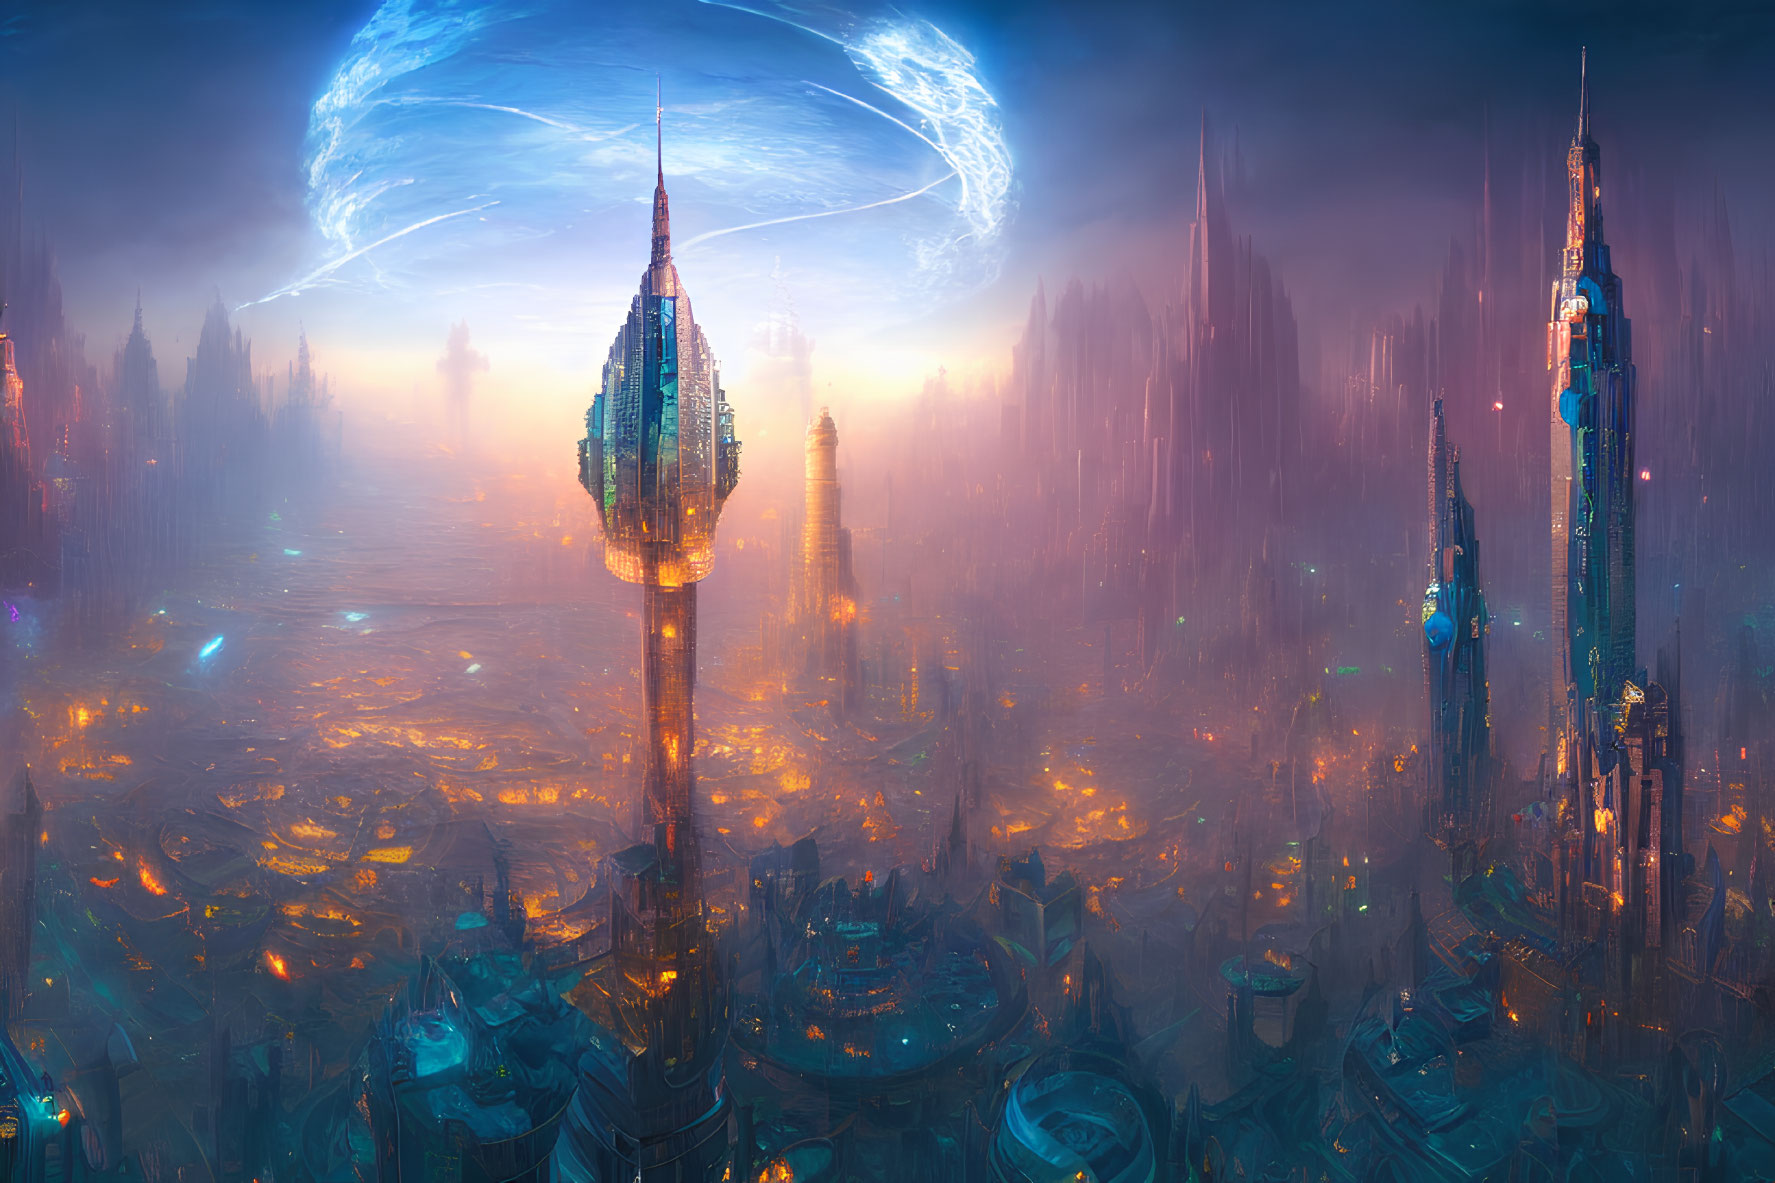 Futuristic cityscape with towering skyscrapers and cosmic energy field in hazy atmosphere